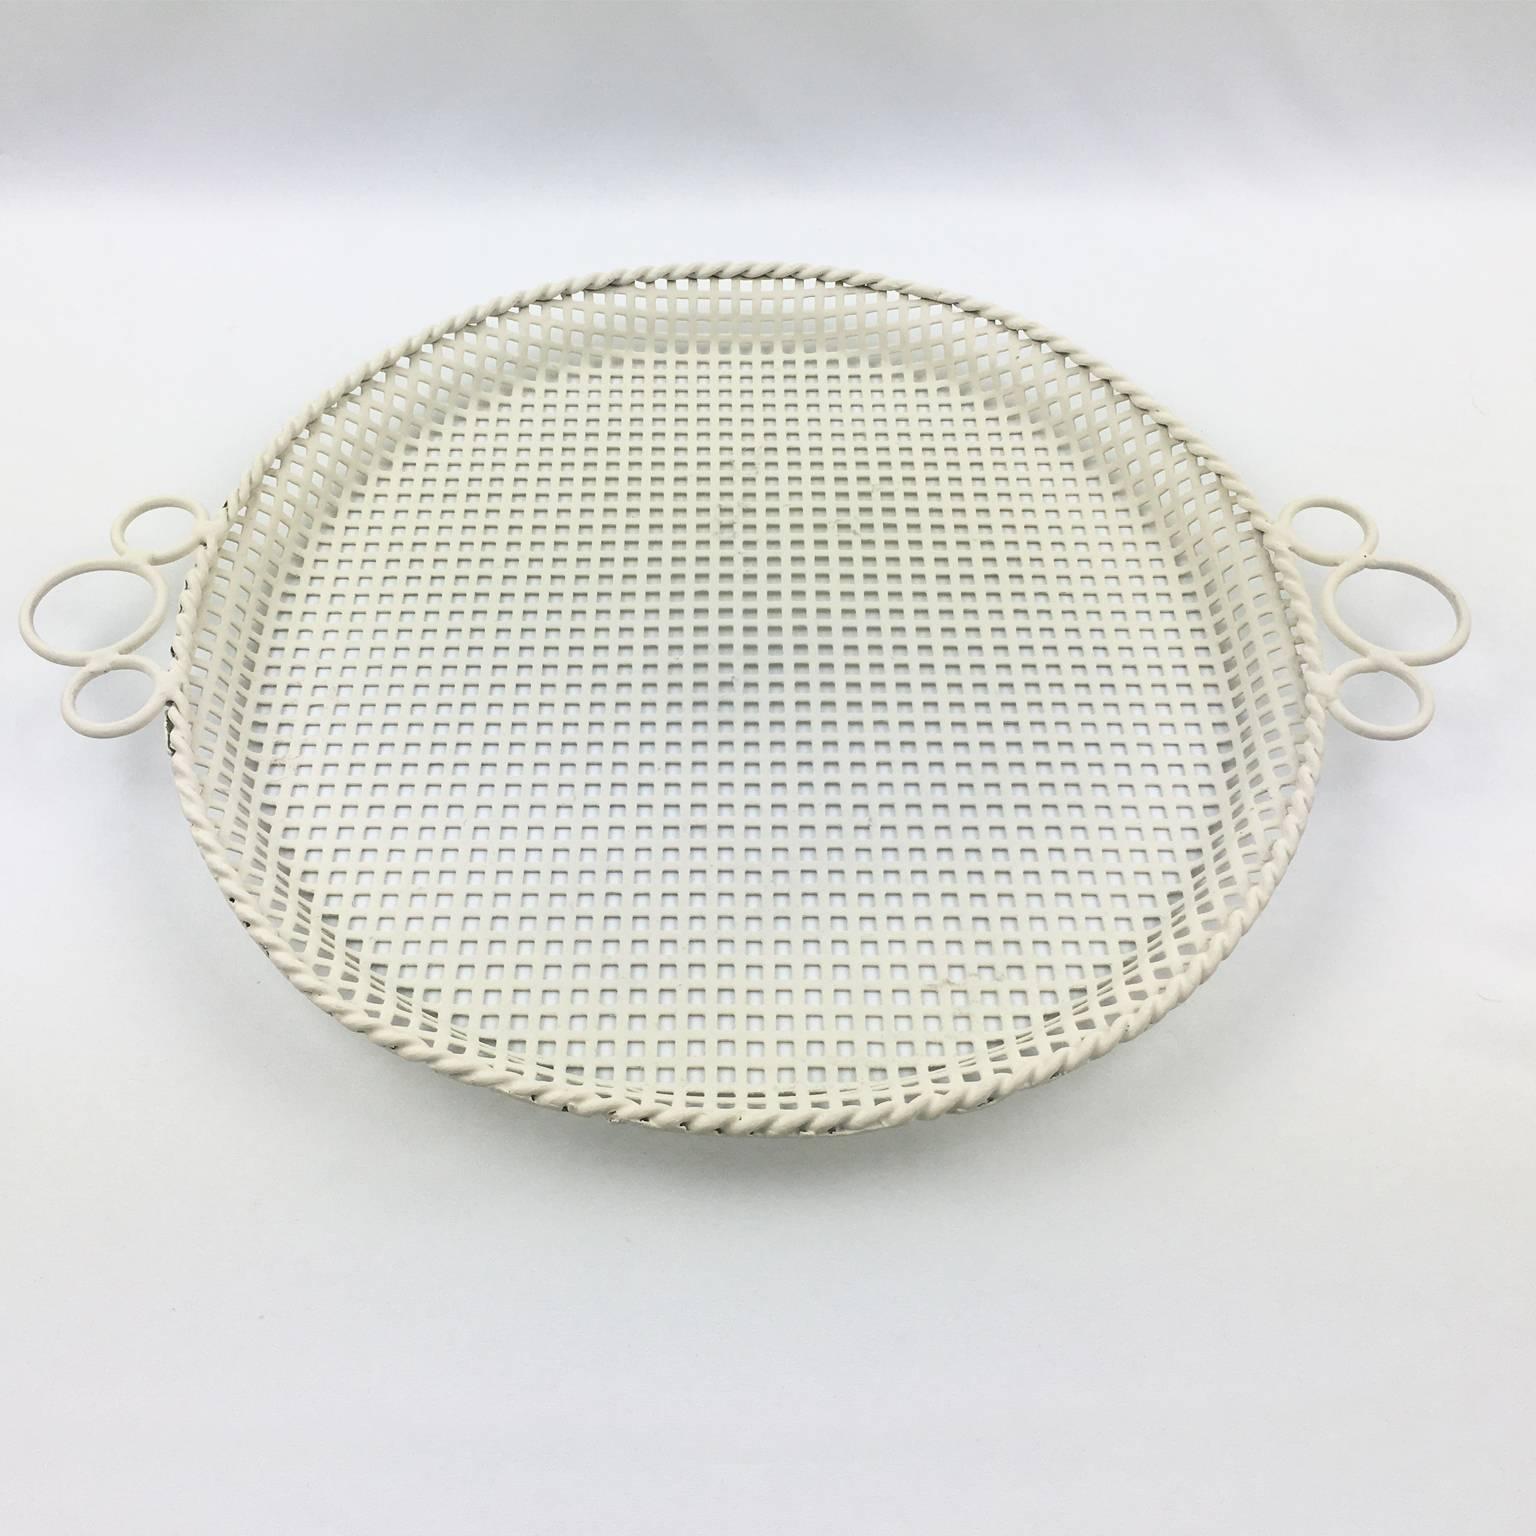 Very nice large barware serving tray in the manner of French designer Mathieu Mategot. A striking example of French, 1950s metalwork. Mid-Century modernist shape, featuring folded and perforated off-white lacquered metal round serving tray platter.